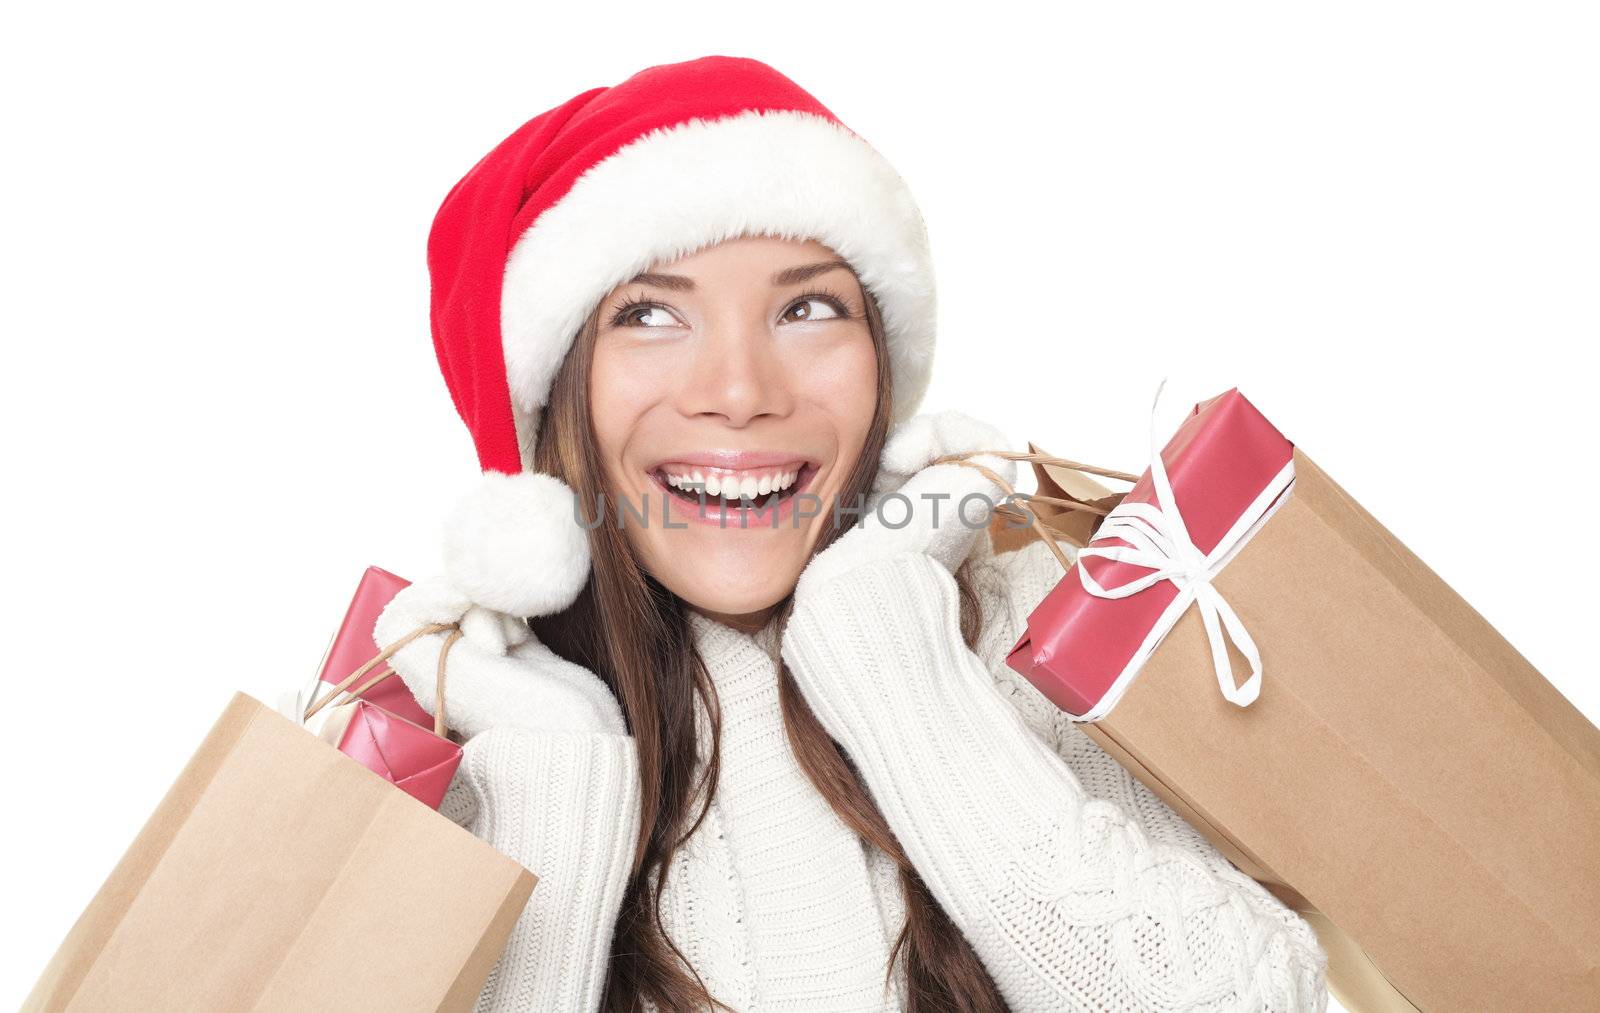 Christmas shopping advertisement woman thinking looking up at copy-space. Isolated head and shoulder portrait of shopper with gift bags. White background.